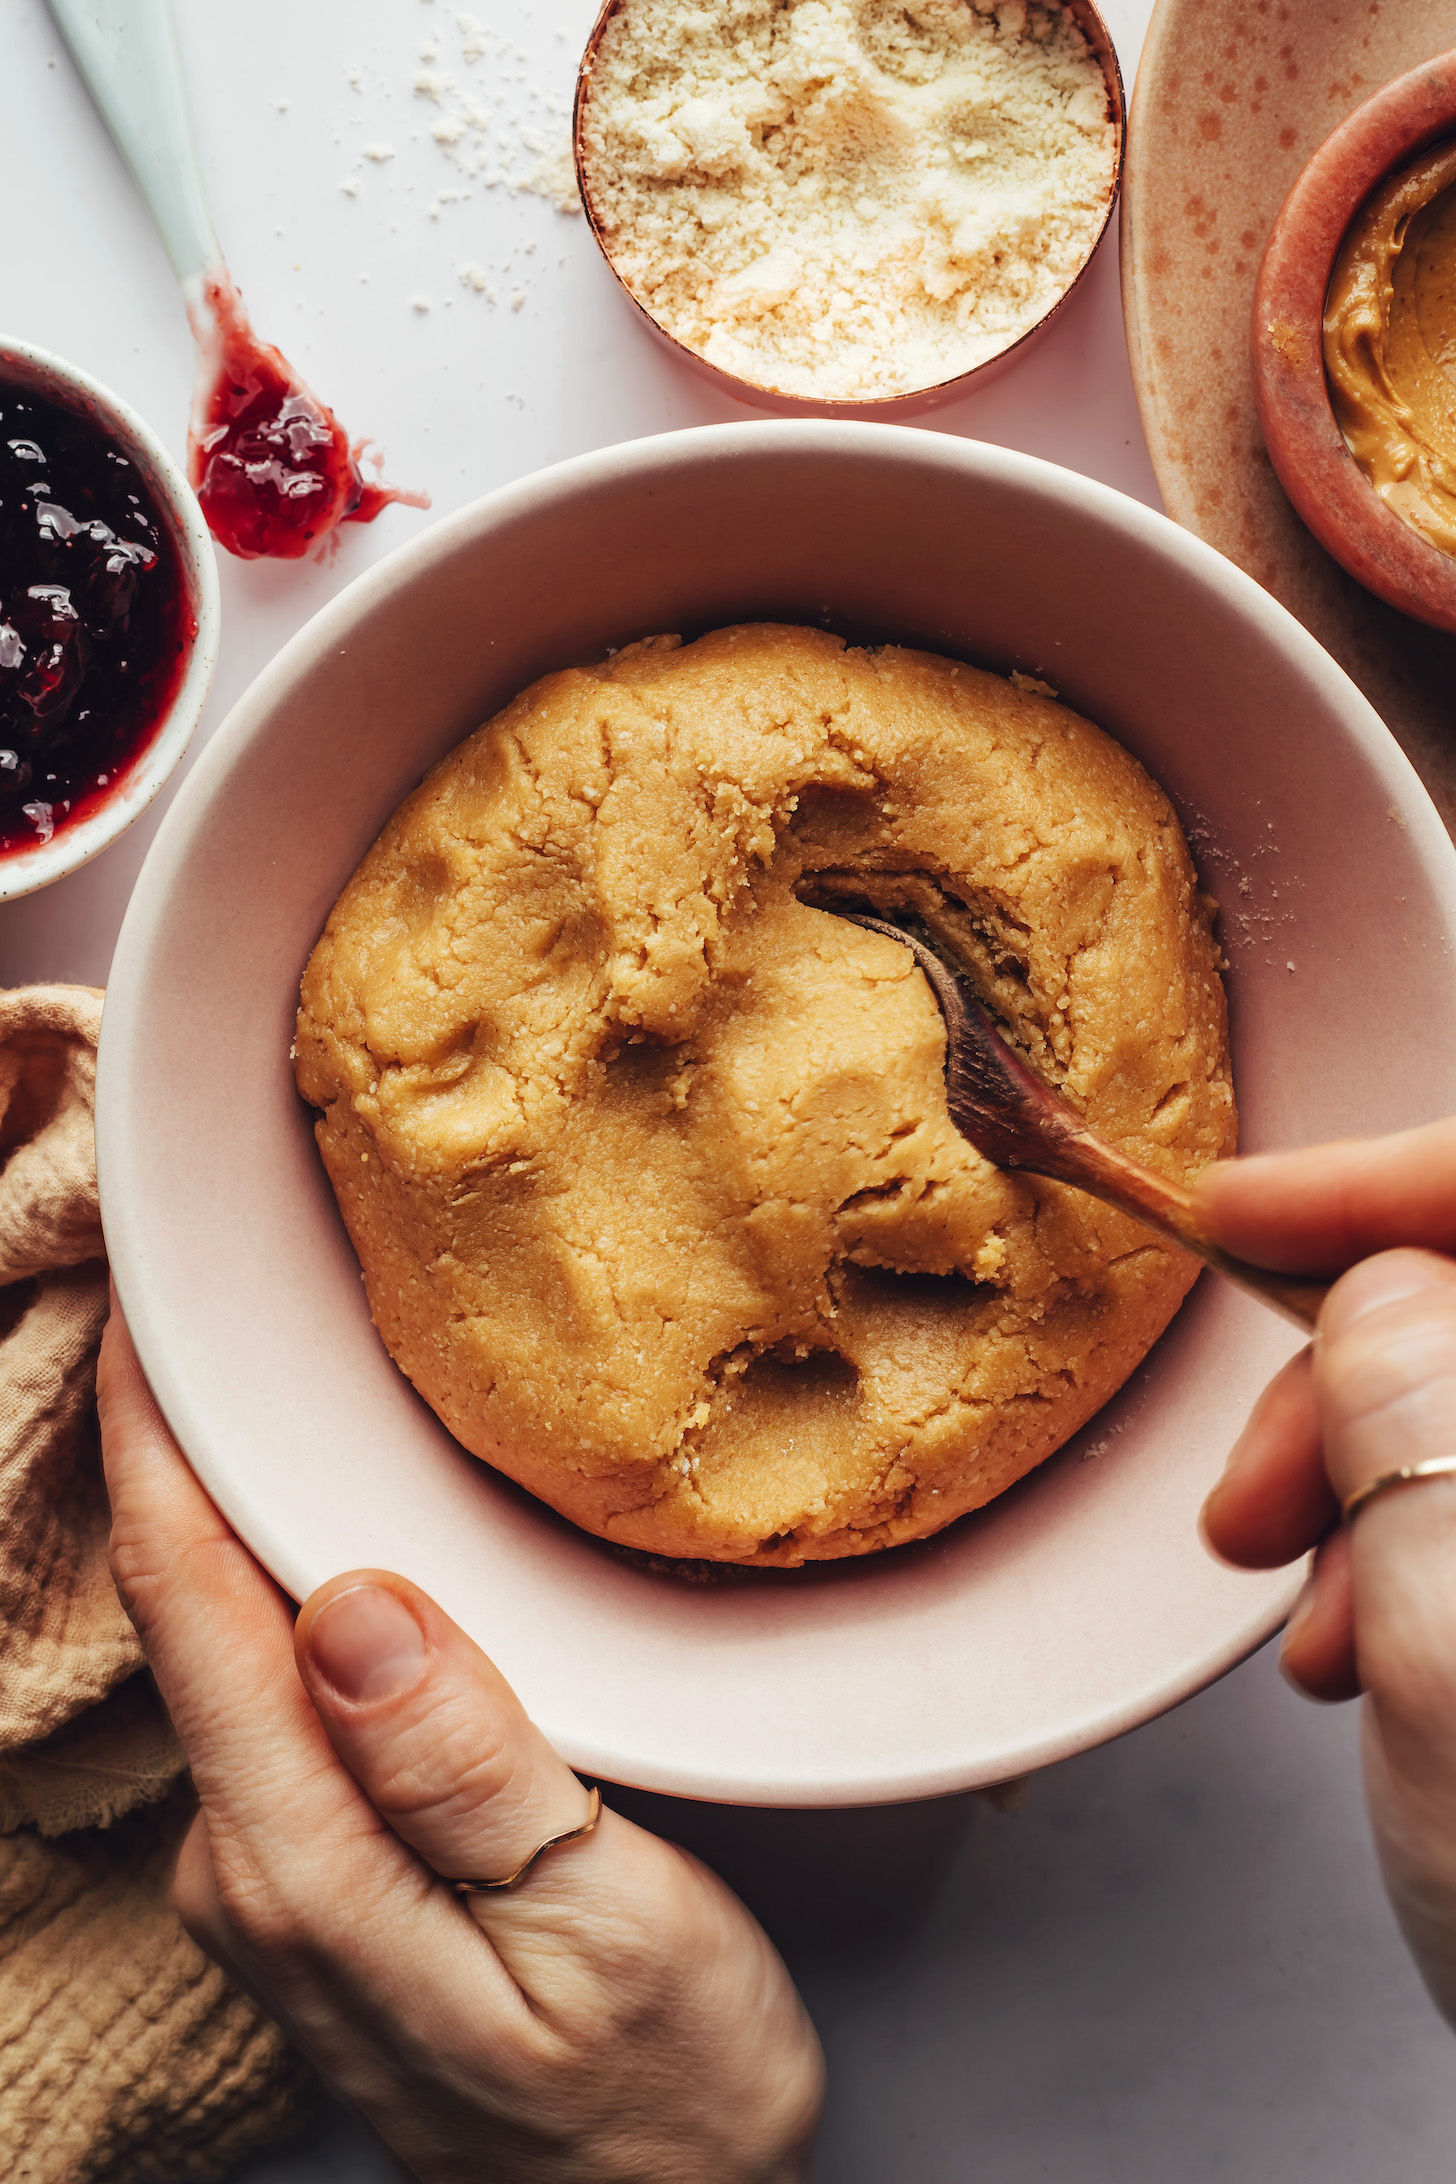 Spoon into a bowl the gluten-free peanut butter thumbprint cookie dough